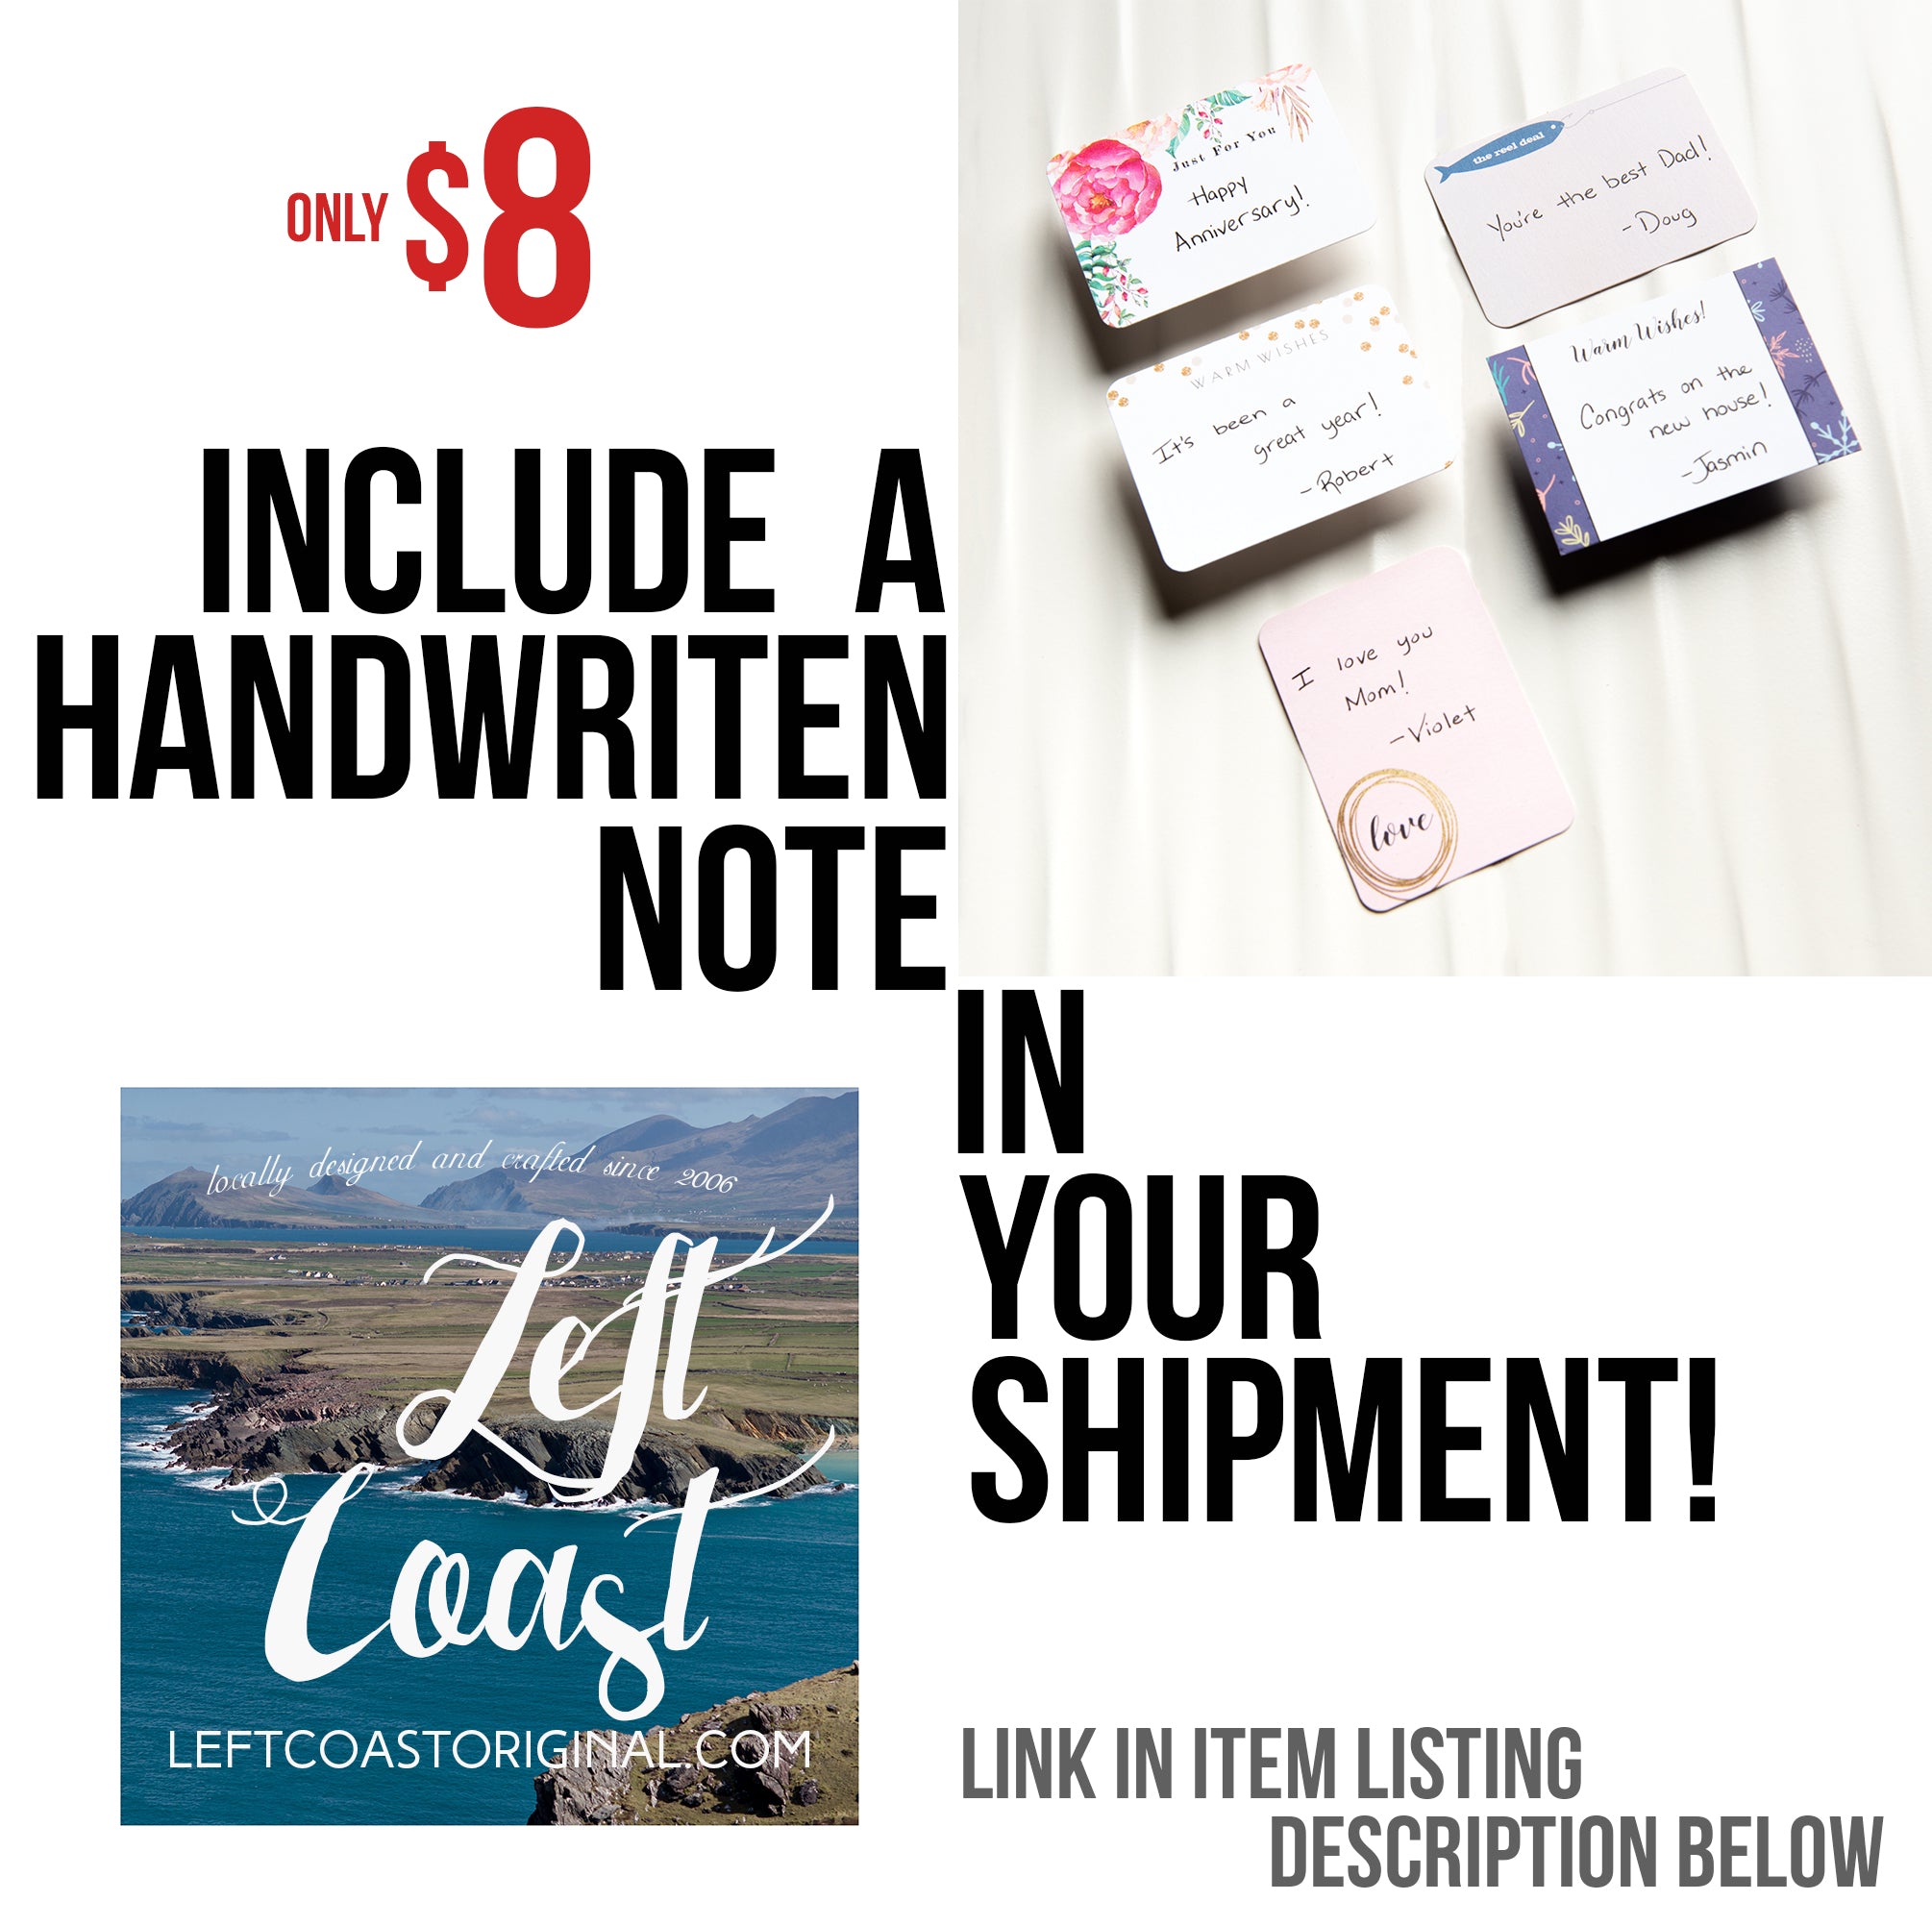 Flyer prompting to include a handwritten note with your order for eight dollars